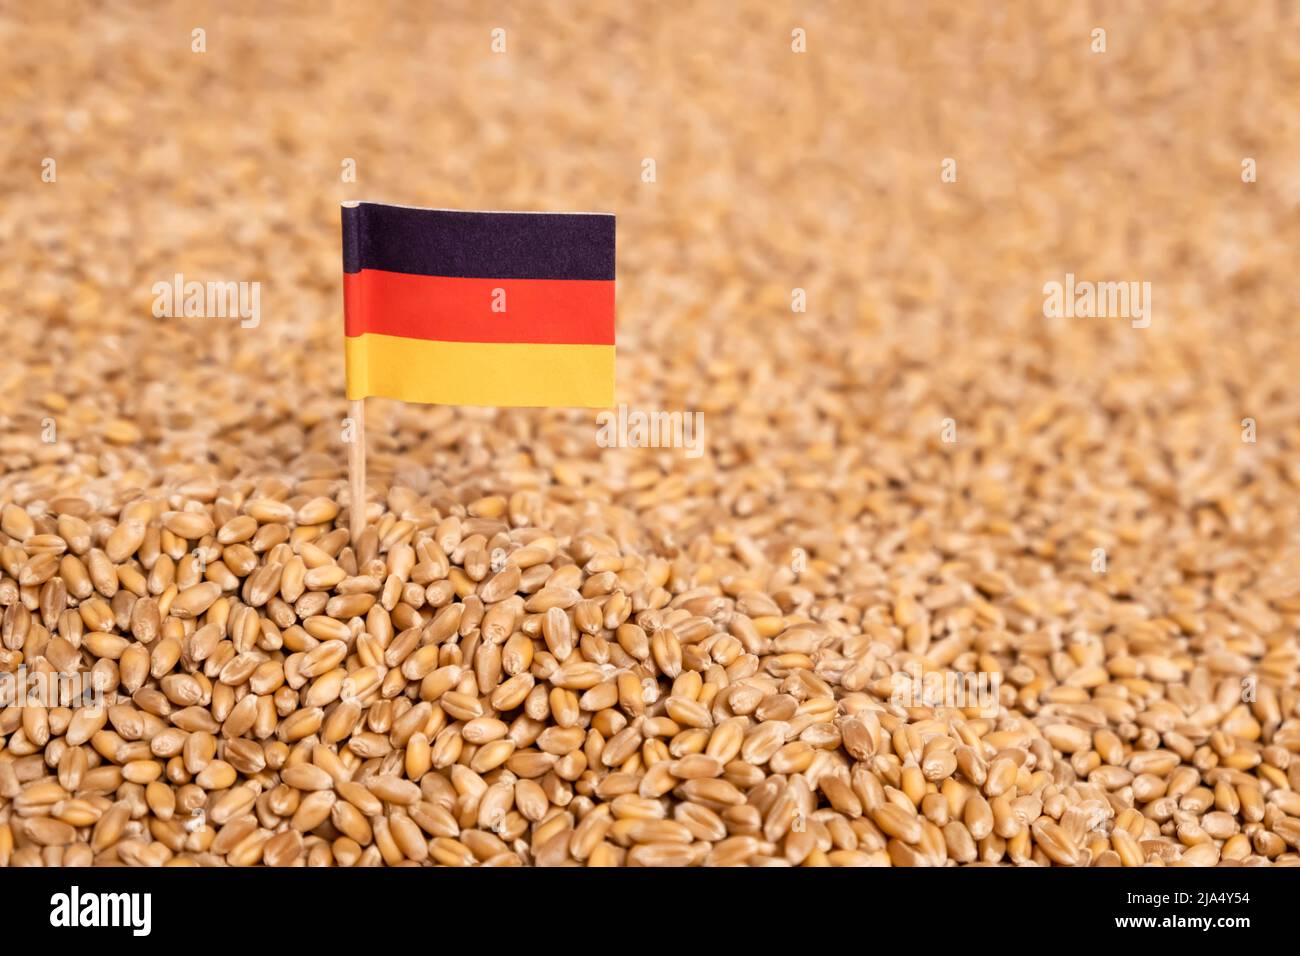 German flag in wheat grain pile as background. Concept of food shortage, grain supply crisis and global food scarcity in Europe and Germany Stock Photo